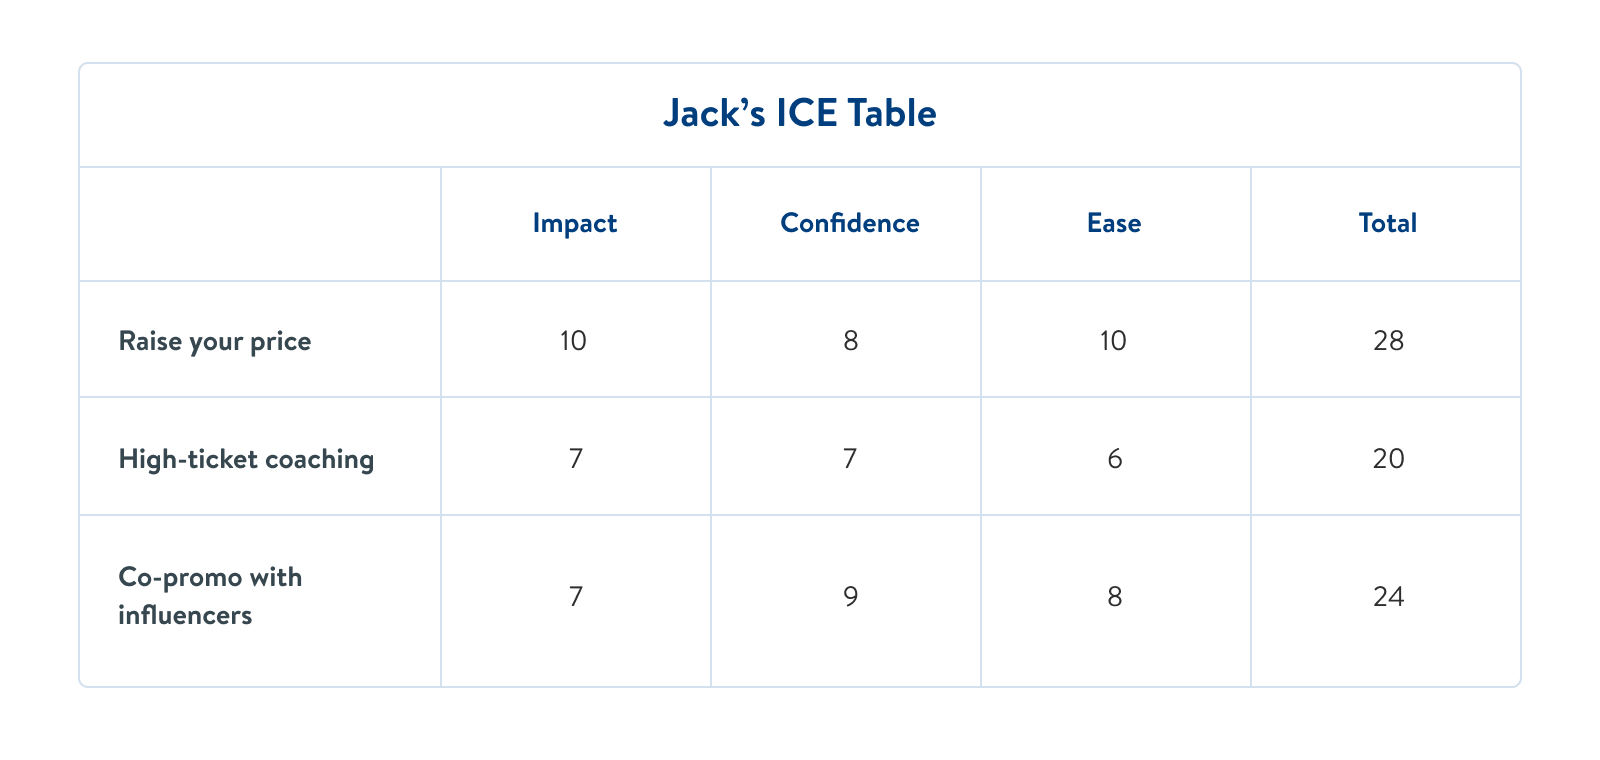 Jack's ICE Table: Raise Your Price = 28, High-ticket coaching = 20, Co-promo with influencers = 24.